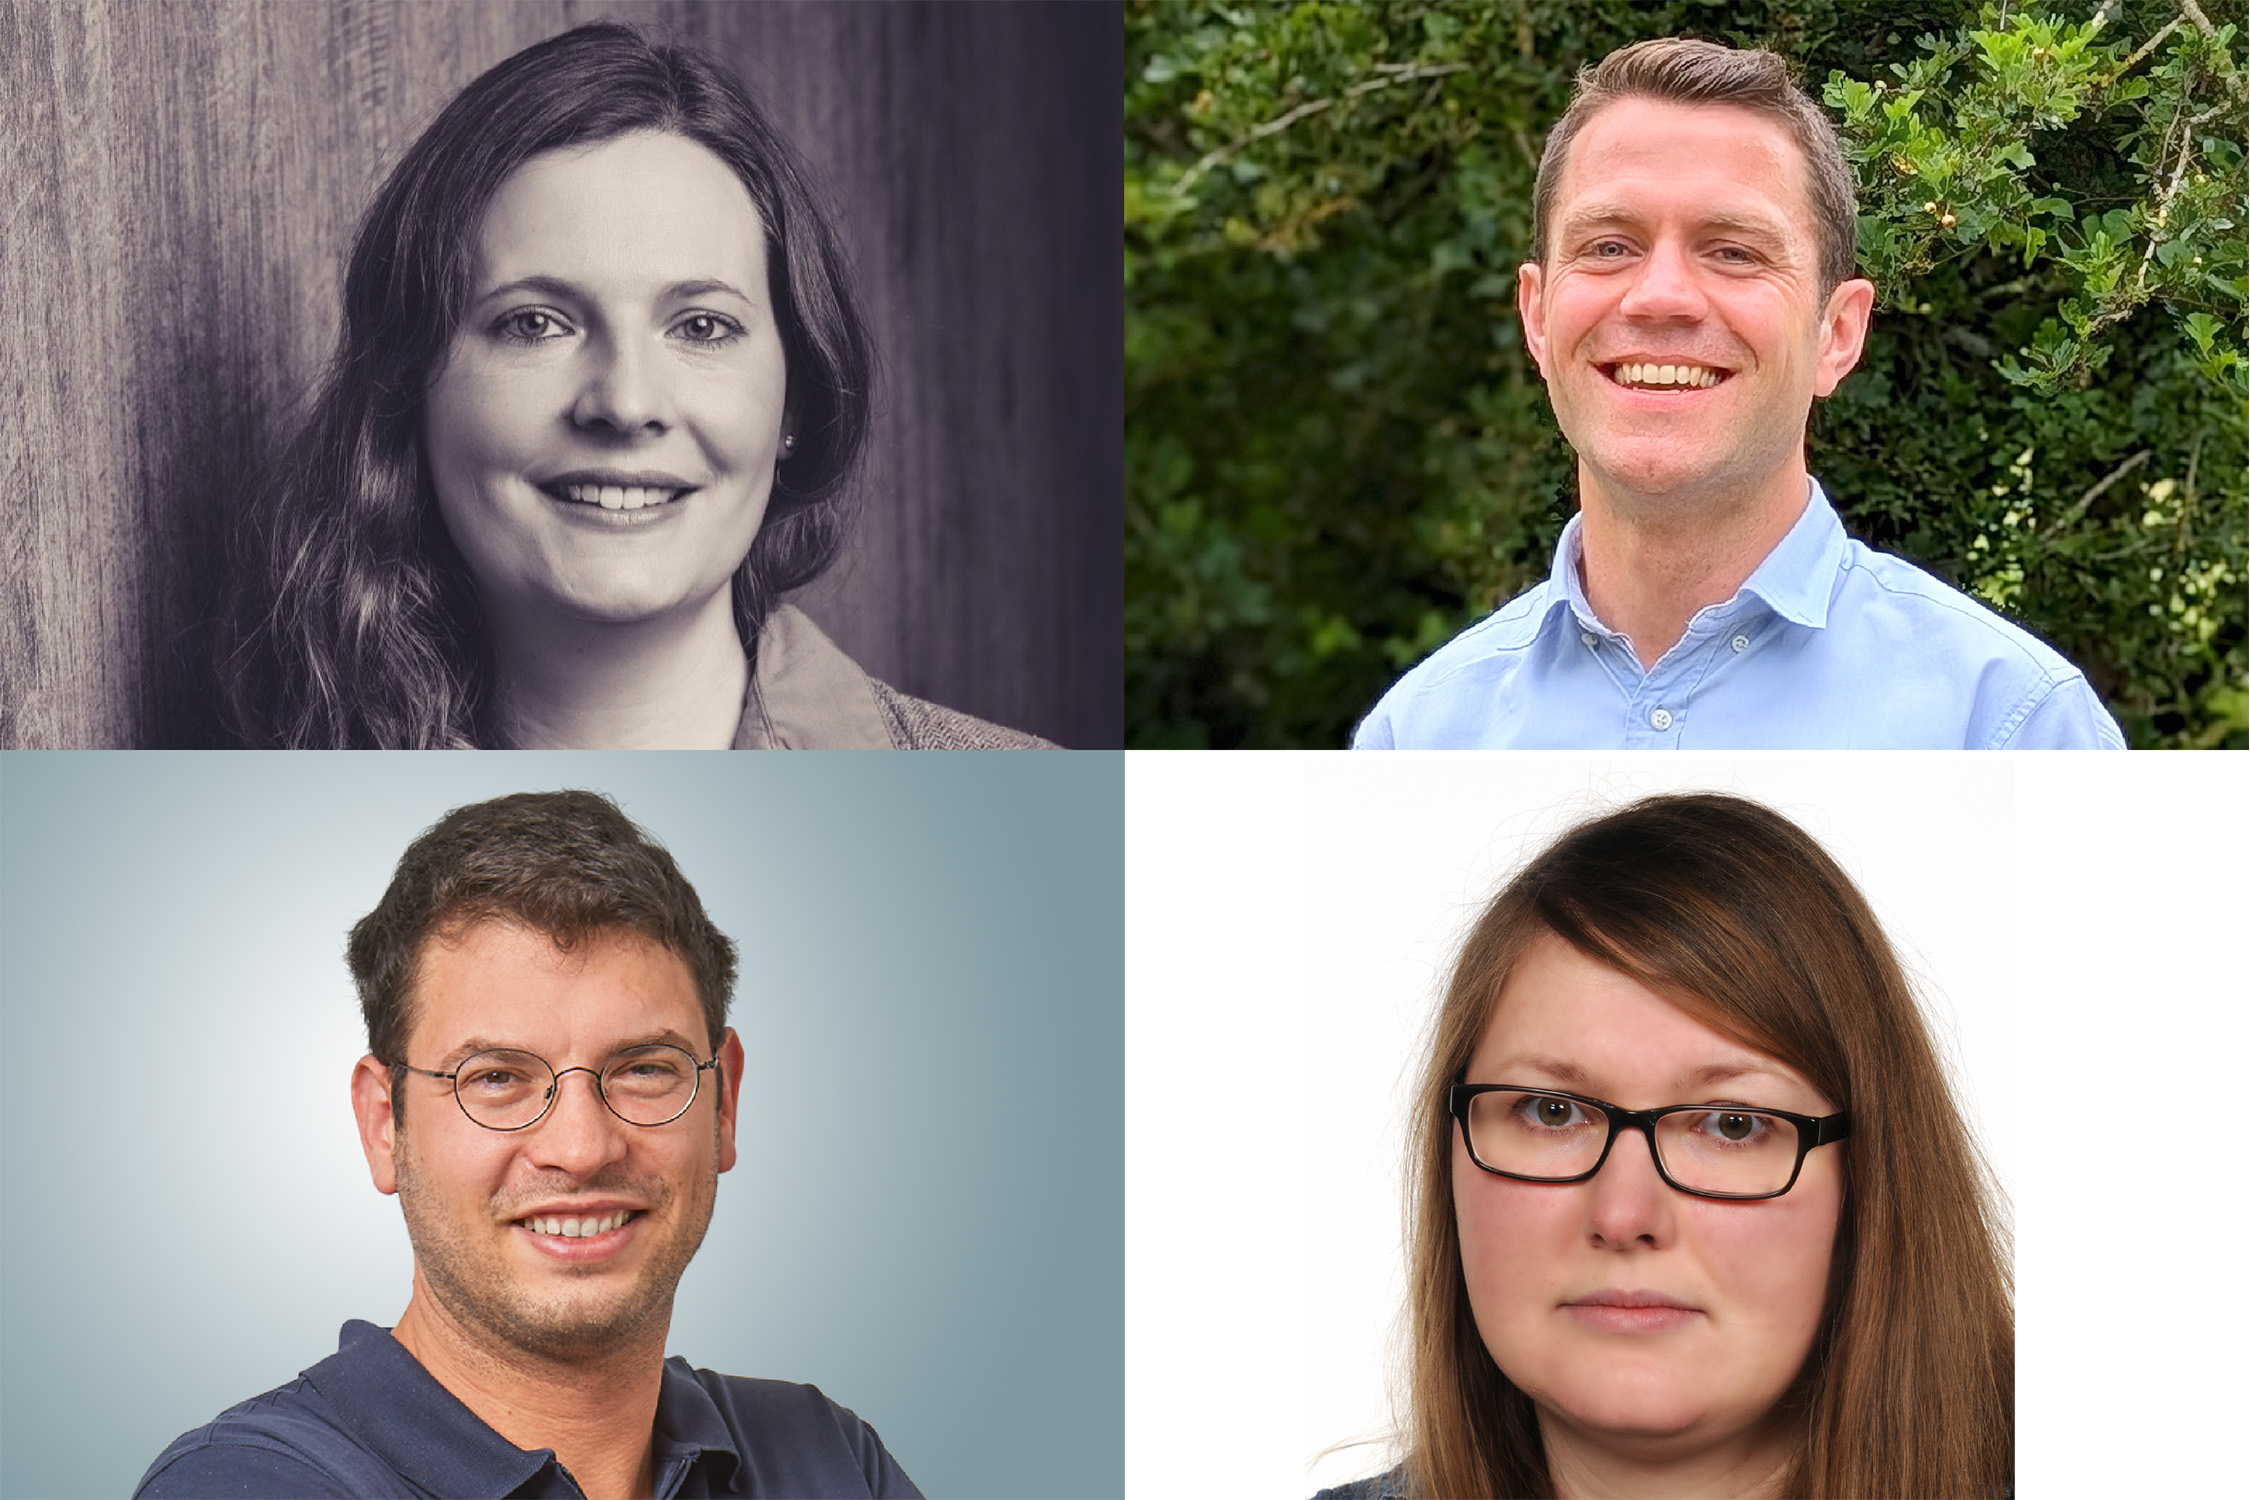 Lina Herhaus (top left), Martin Jahn (top right), Milan Gerovac (bottom left) and Natalia Torow (bottom right) are MICROSTAR junior research group leaders at HZI.